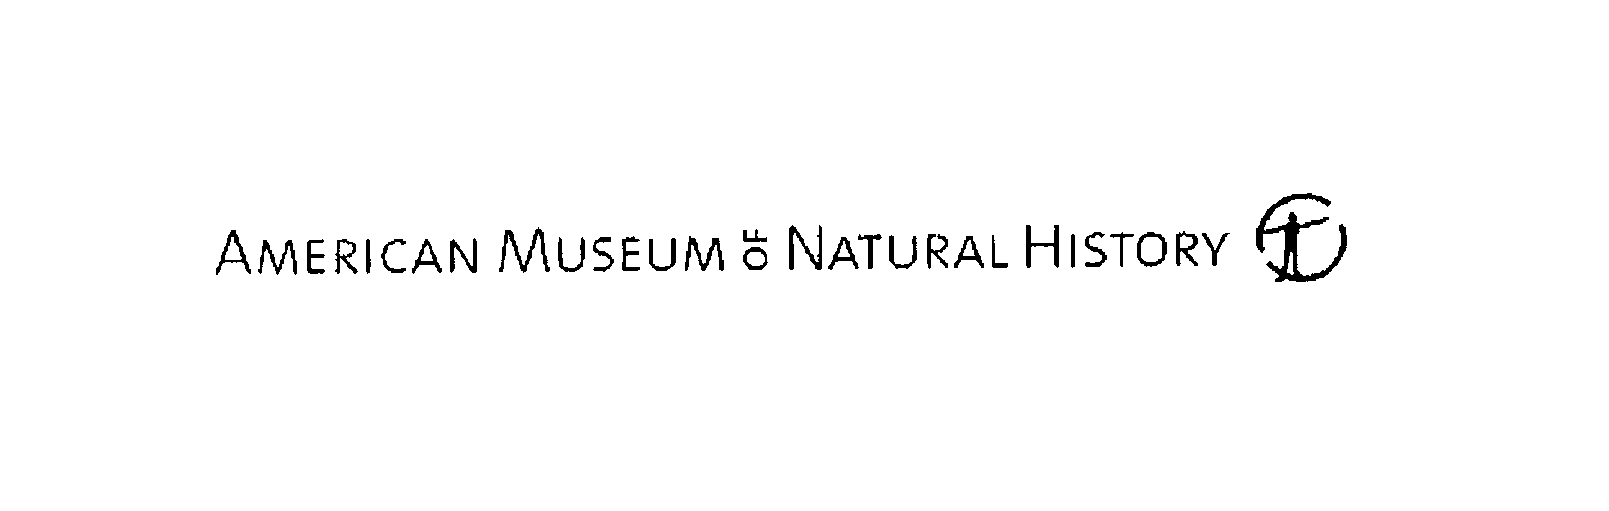  AMERICAN MUSEUM OF NATURAL HISTORY